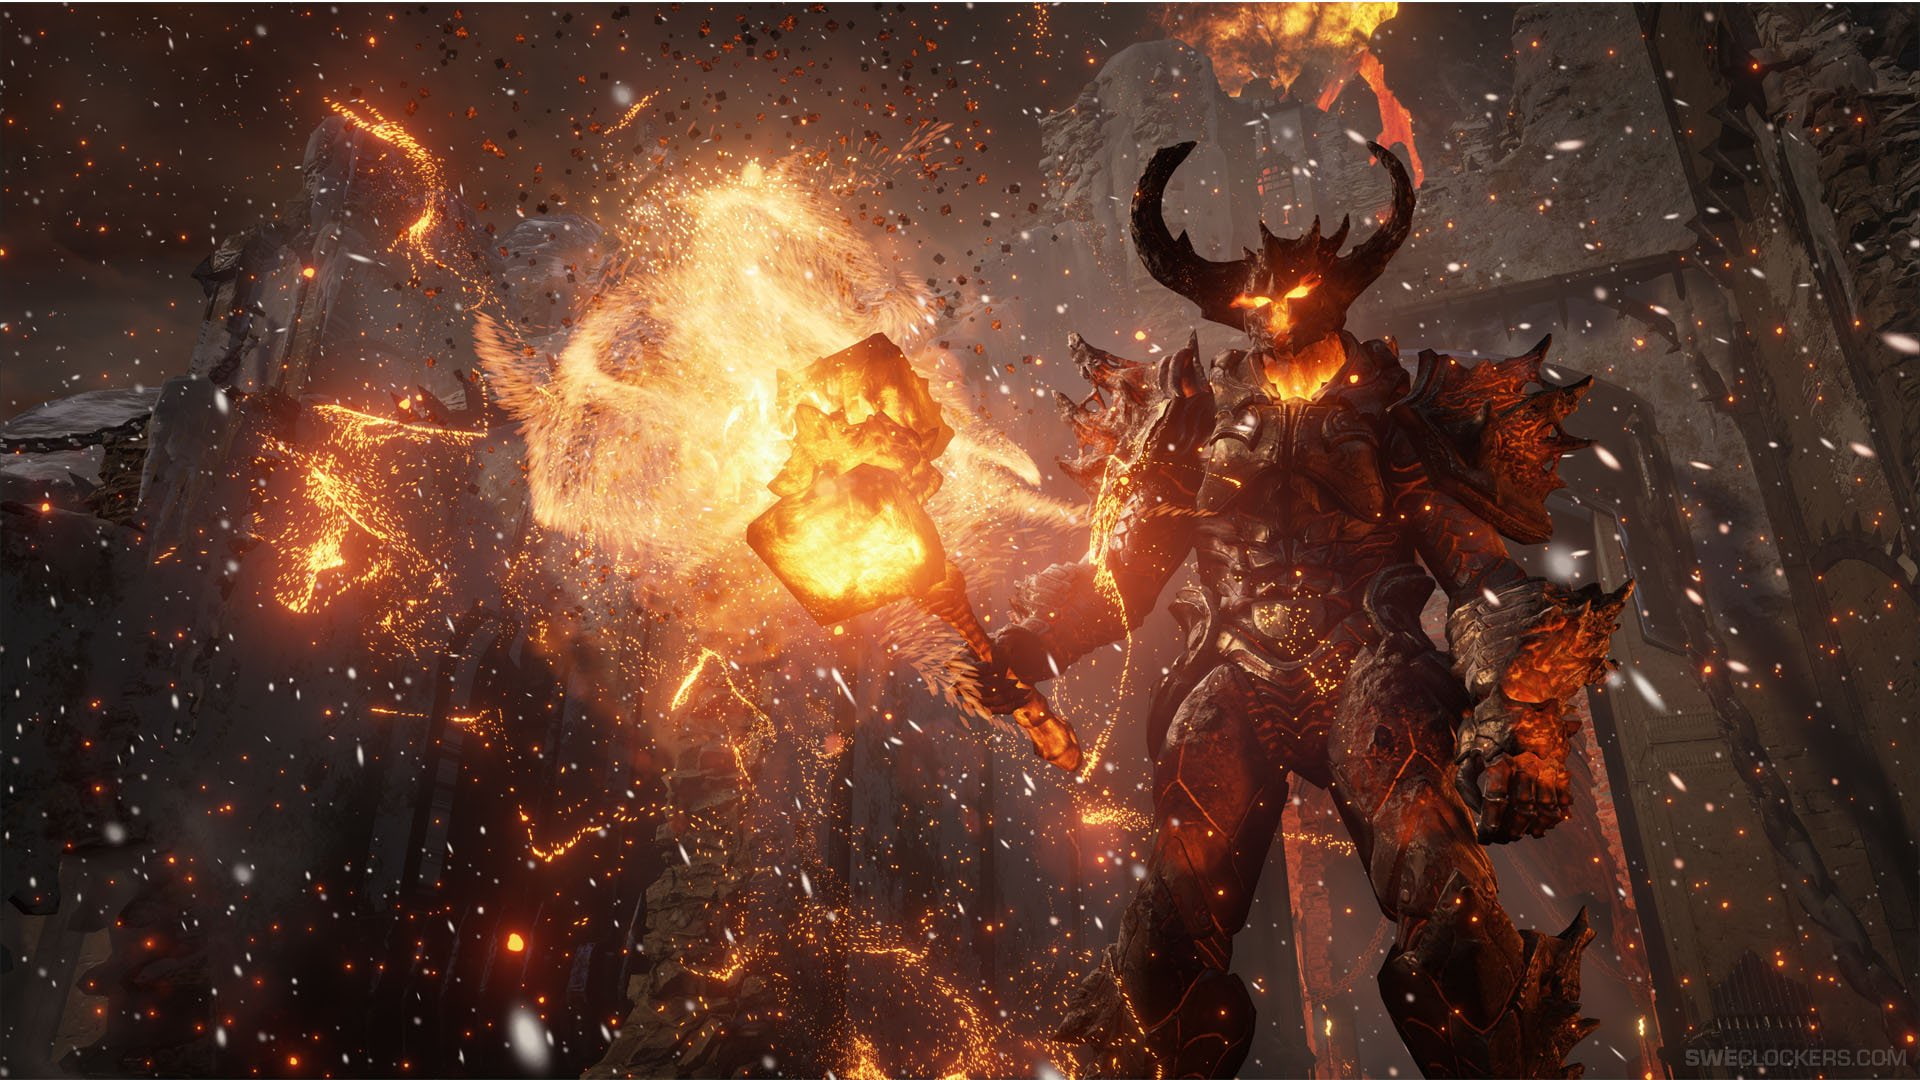 Unreal, Unreal Engine 4, Creature, Fire, Hell, Warrior